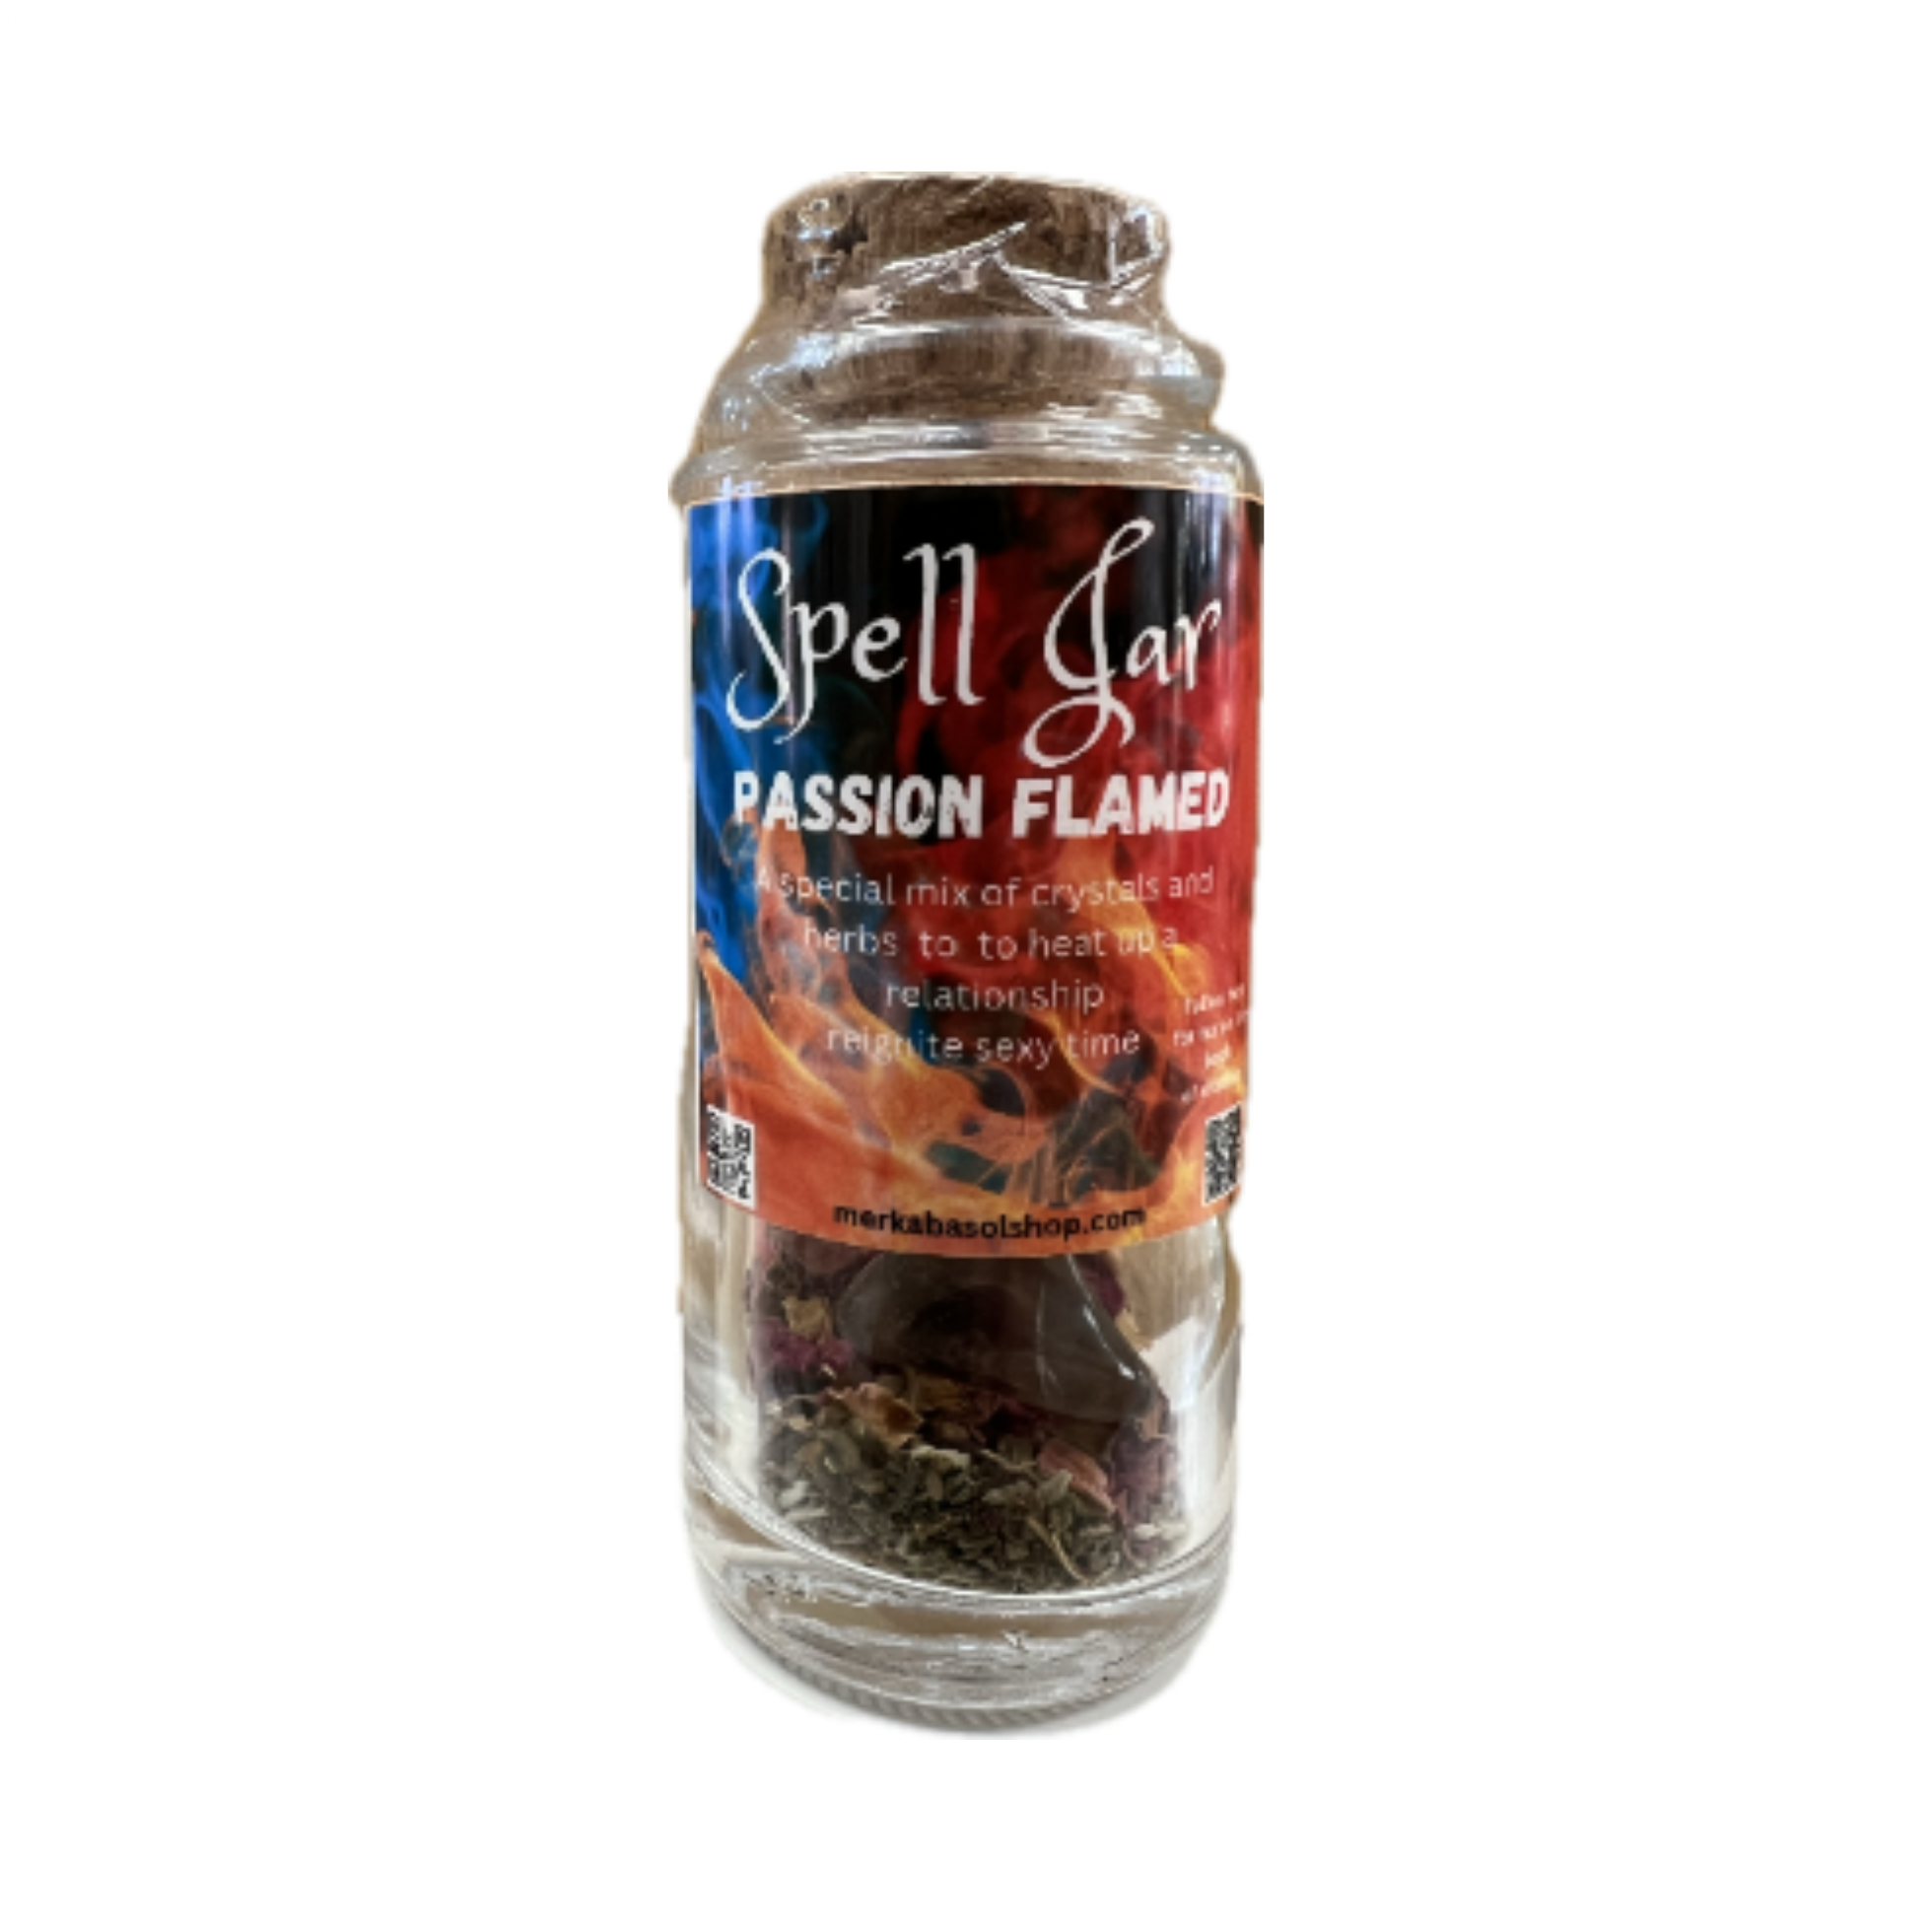 Passion Flamed Spell Jar